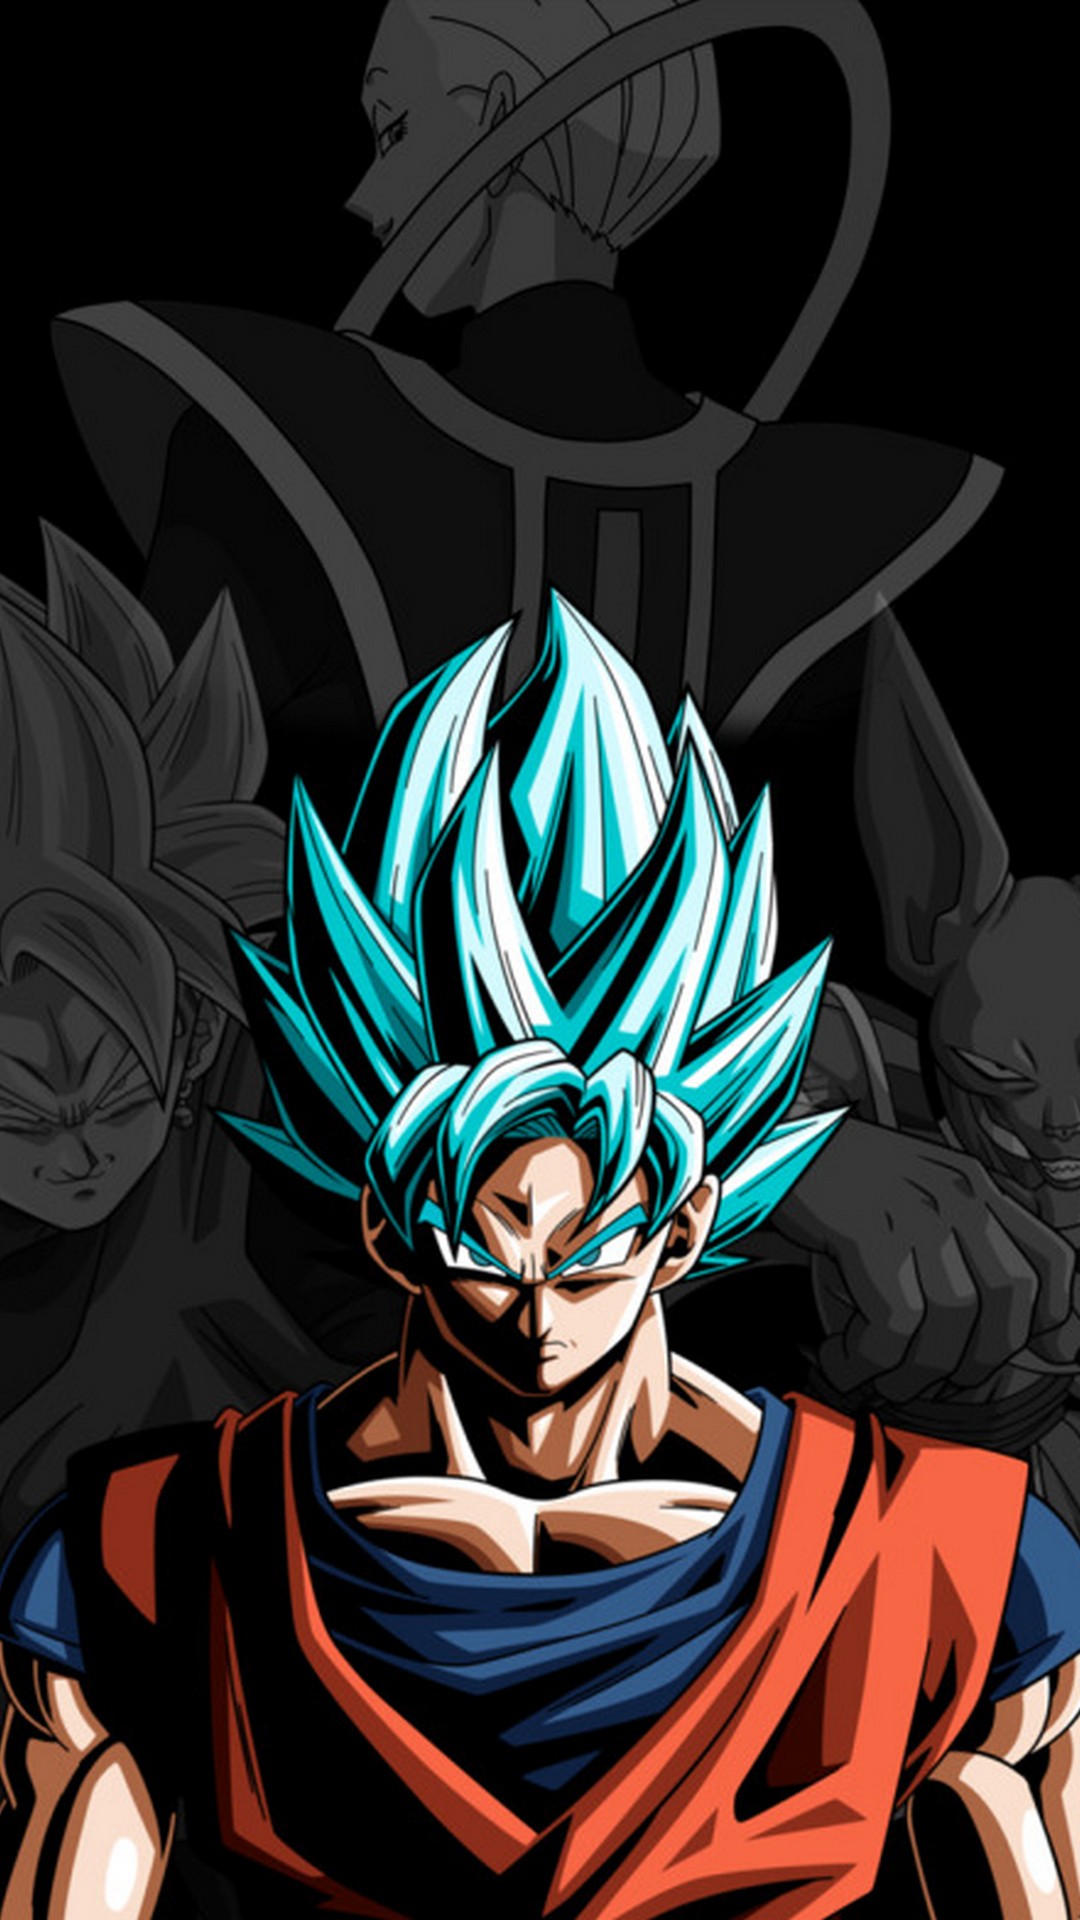 iPhone Wallpaper Goku SSJ with image resolution 1080x1920 pixel. You can make this wallpaper for your iPhone 5, 6, 7, 8, X backgrounds, Mobile Screensaver, or iPad Lock Screen